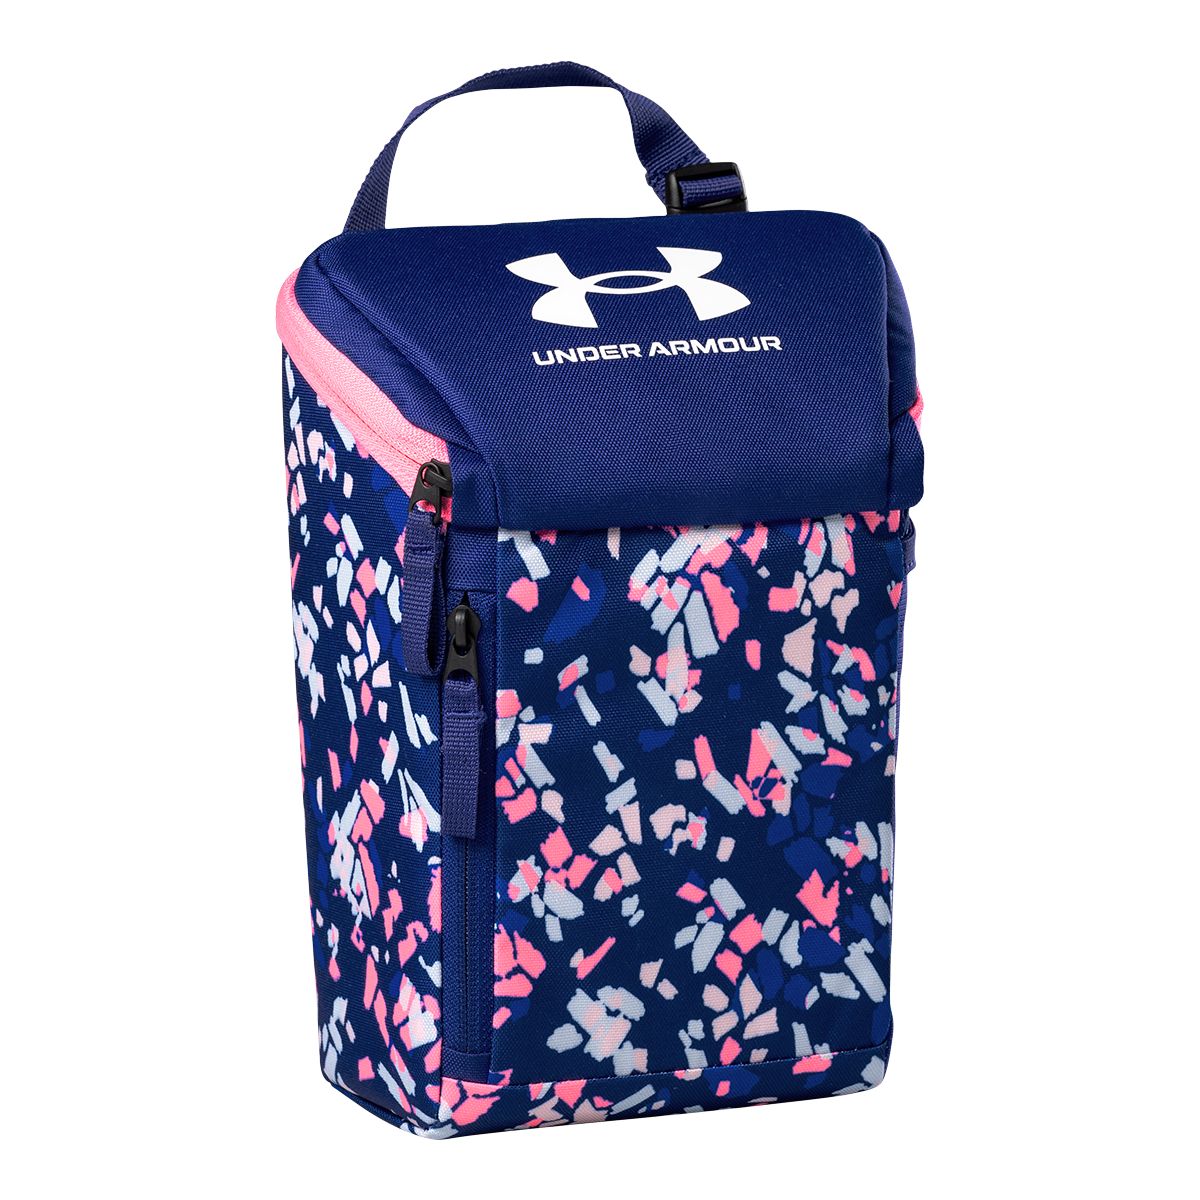 Under Armour Sideline Lunch Box/Bag  Mini Hard Shell